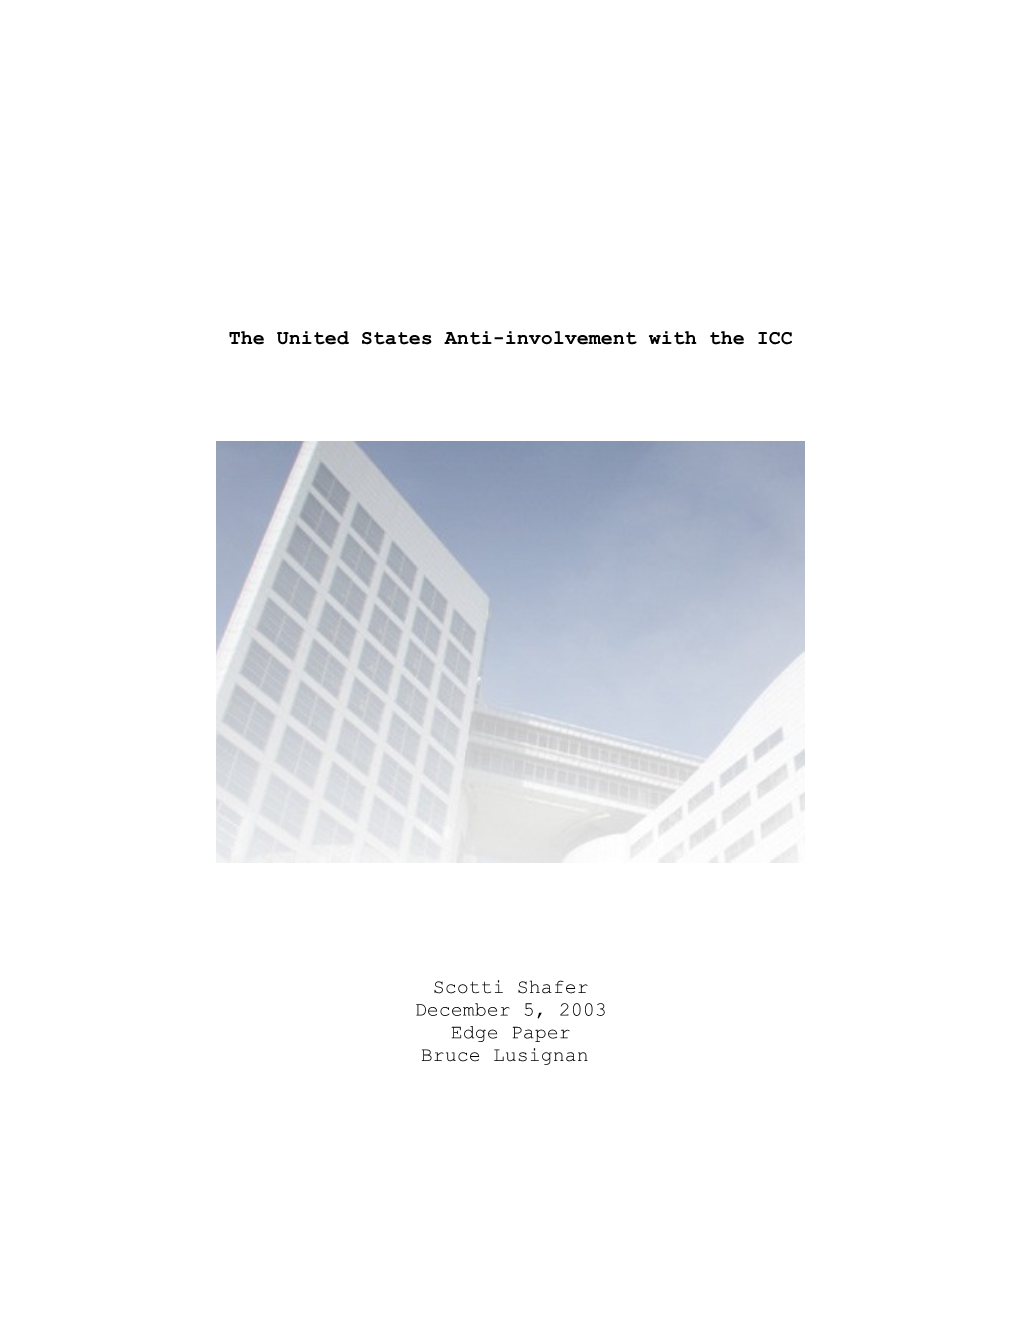 The United States Anti-Involvement with the ICC